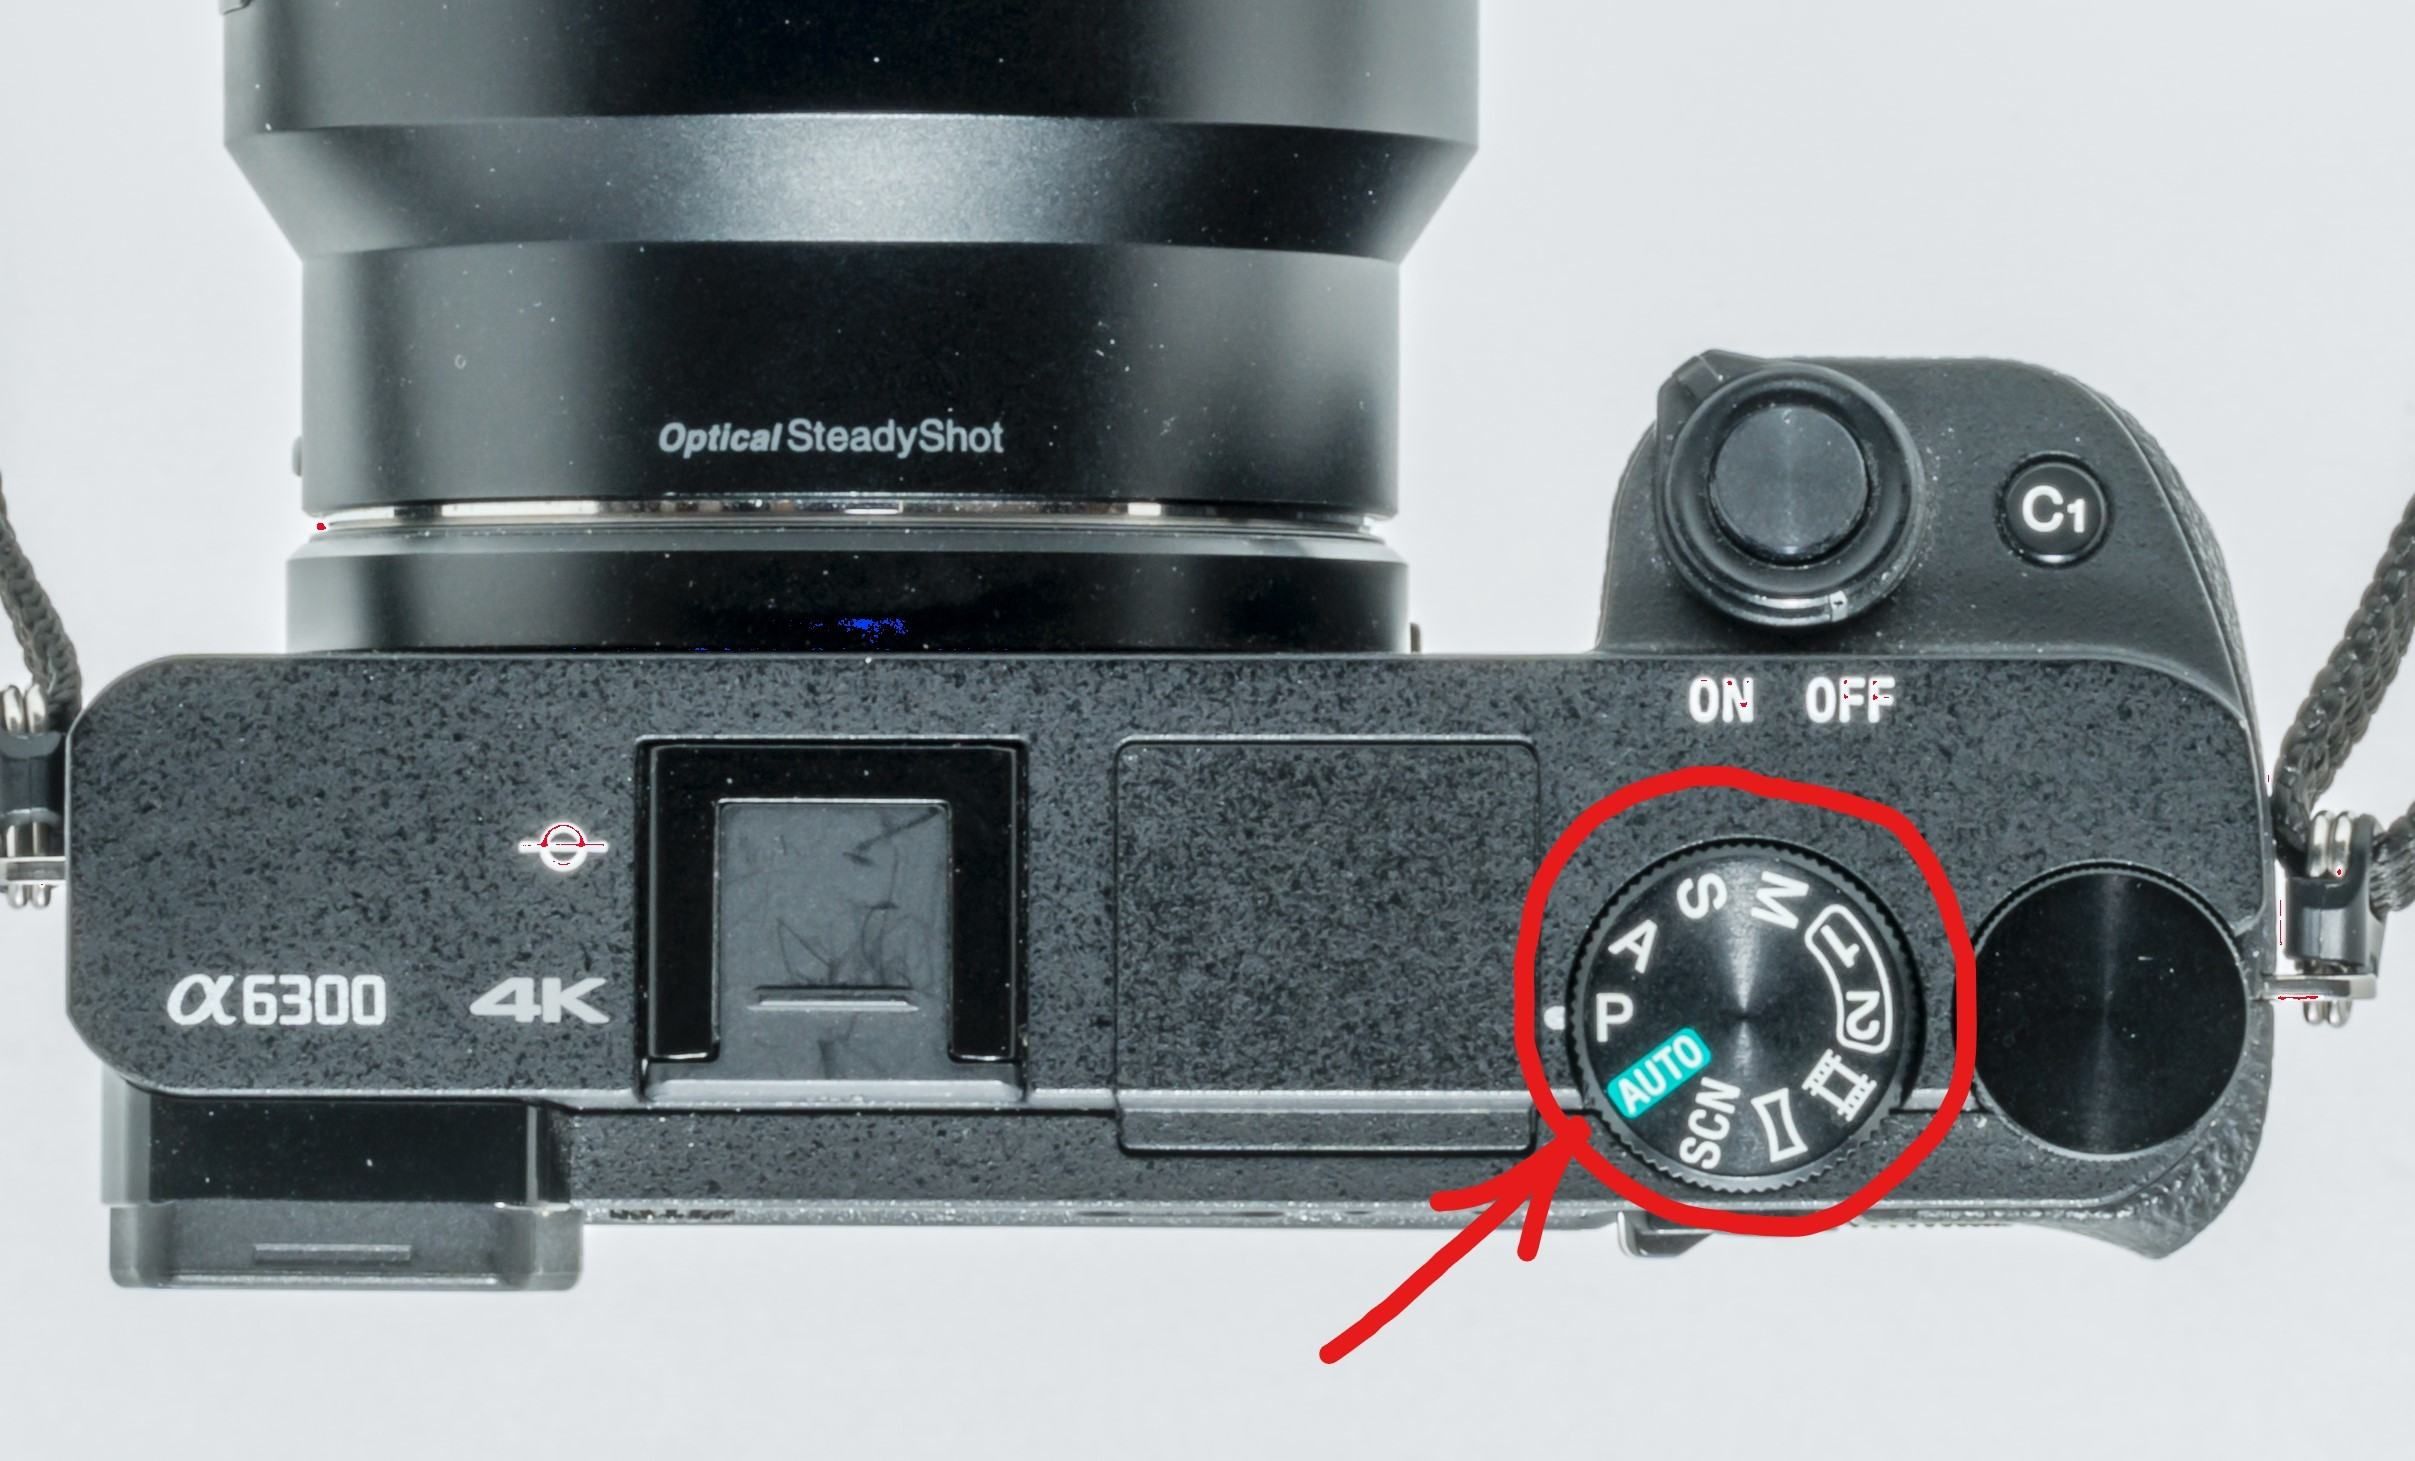 What is the Difference between Manual And Auto Mode? 